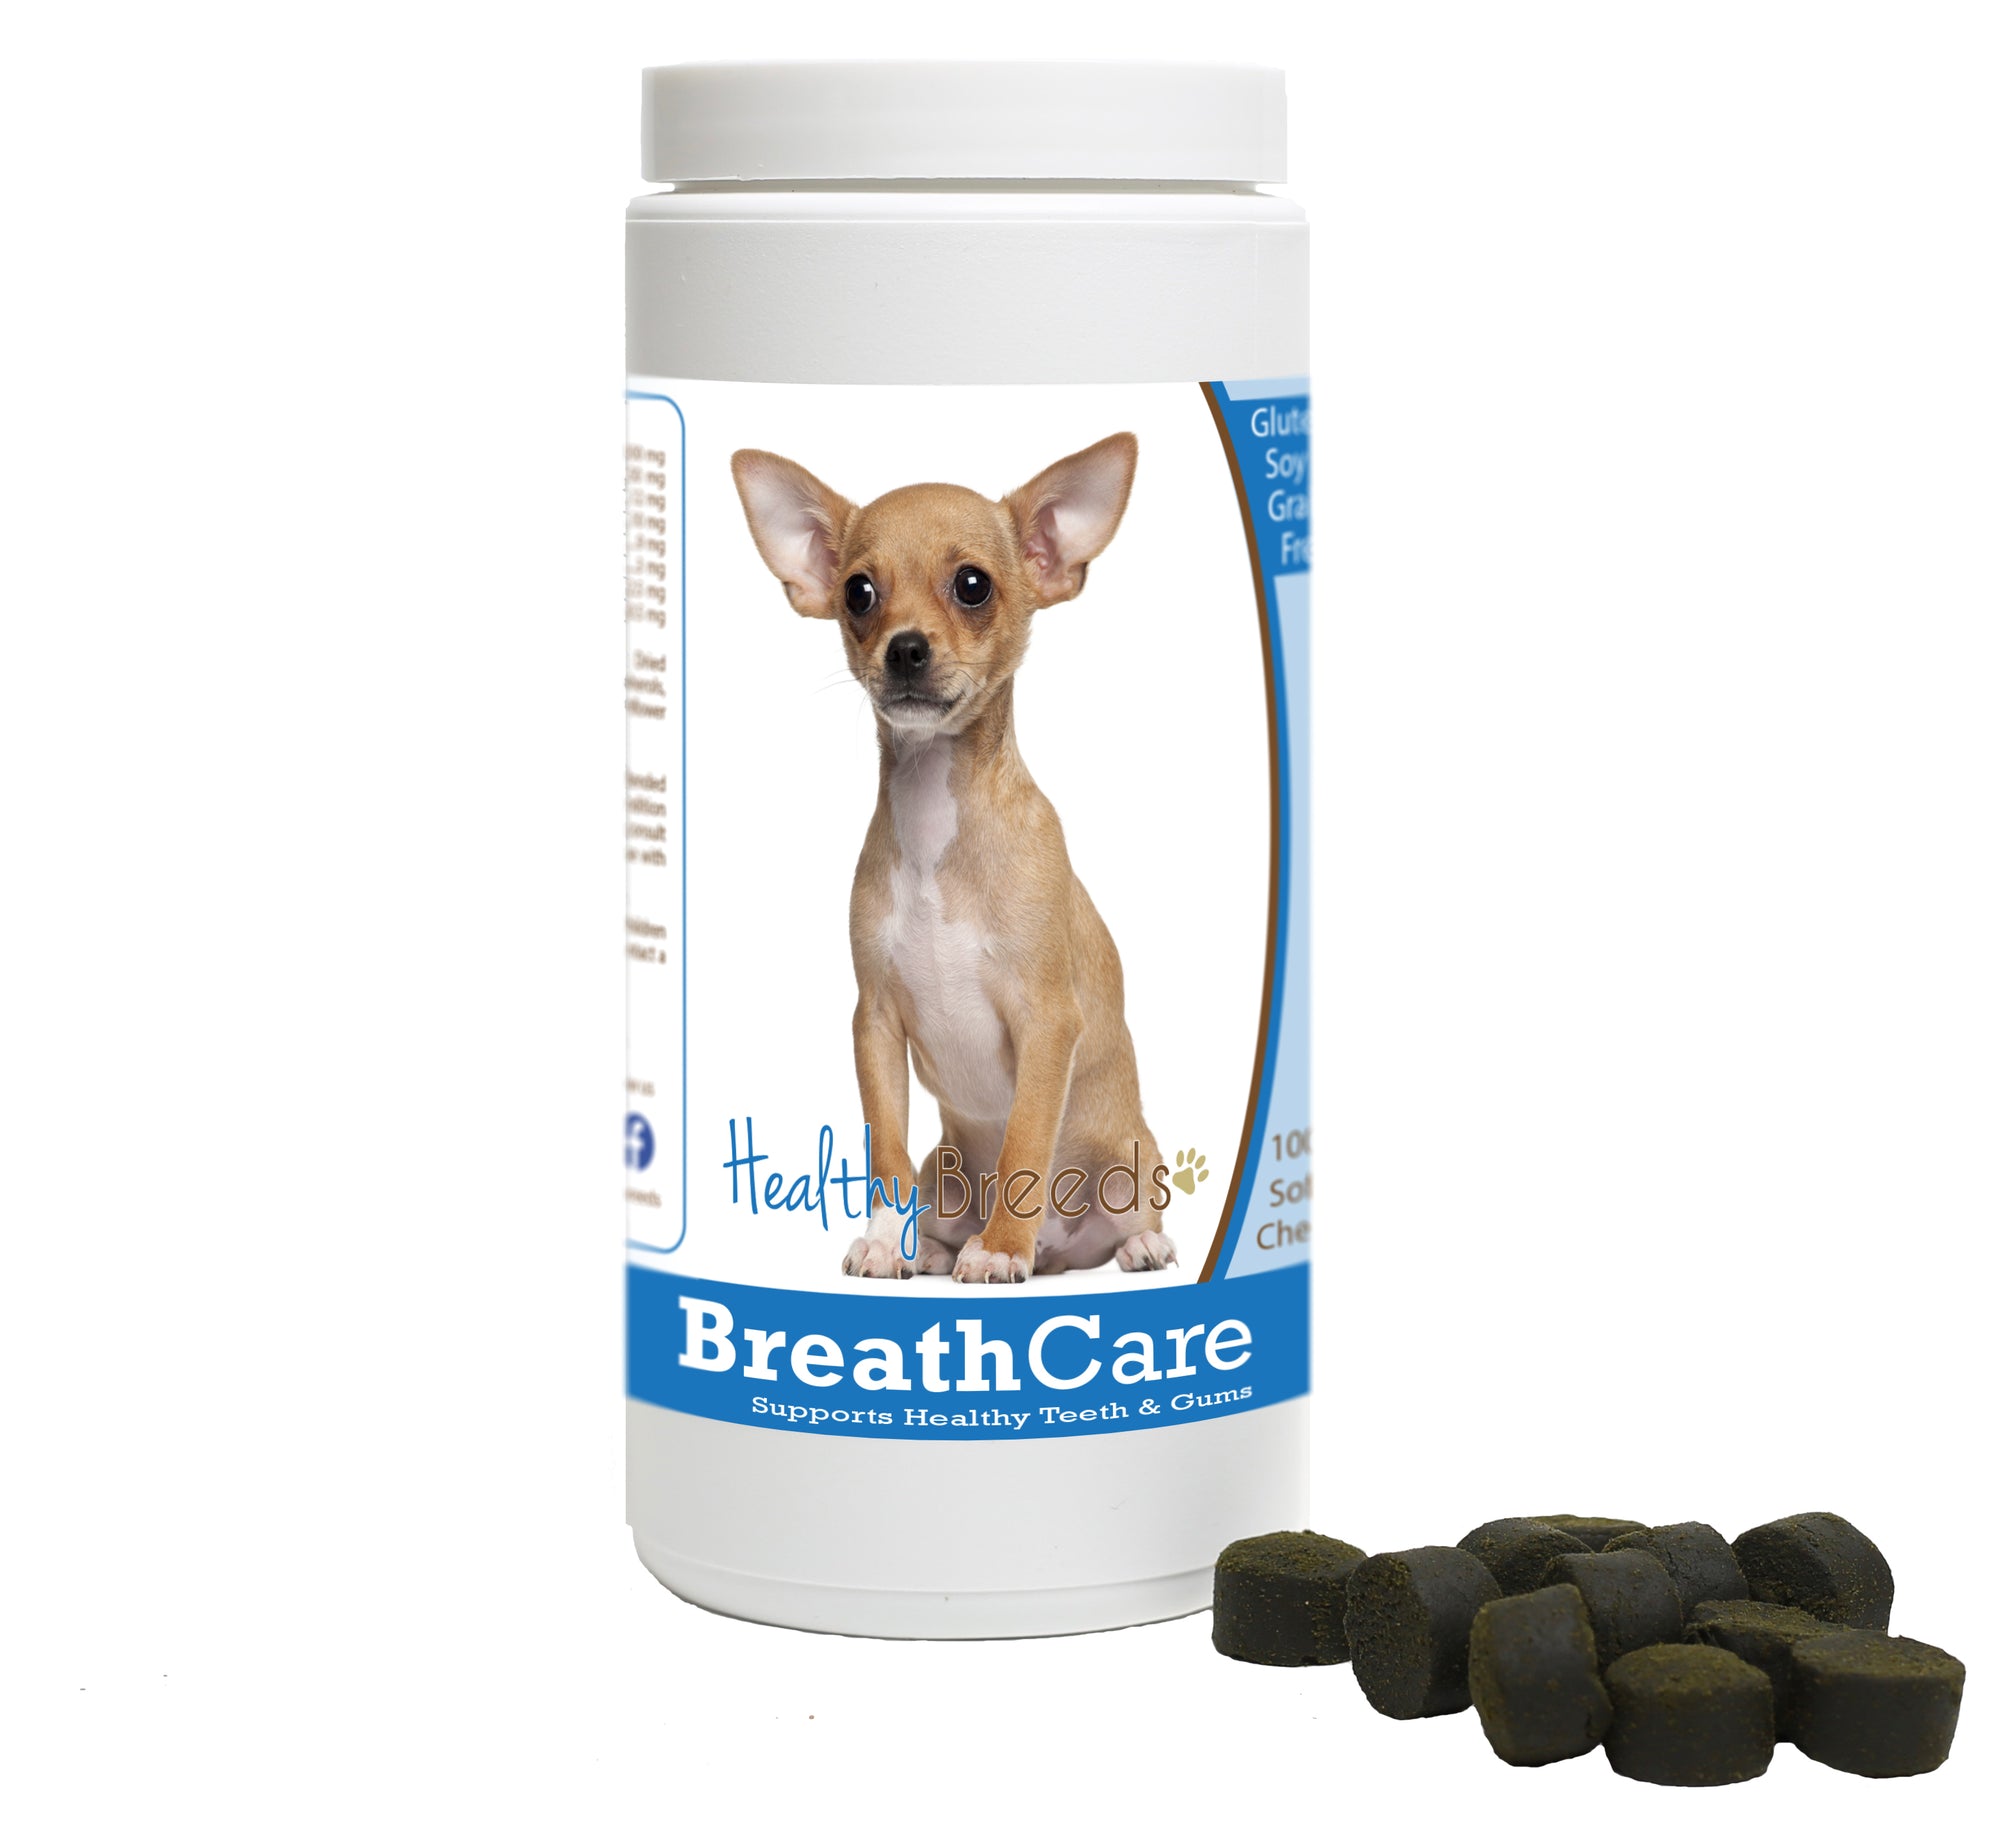 Healthy Breeds Chihuahua Breath Care Soft Chews for Dogs 60 Count